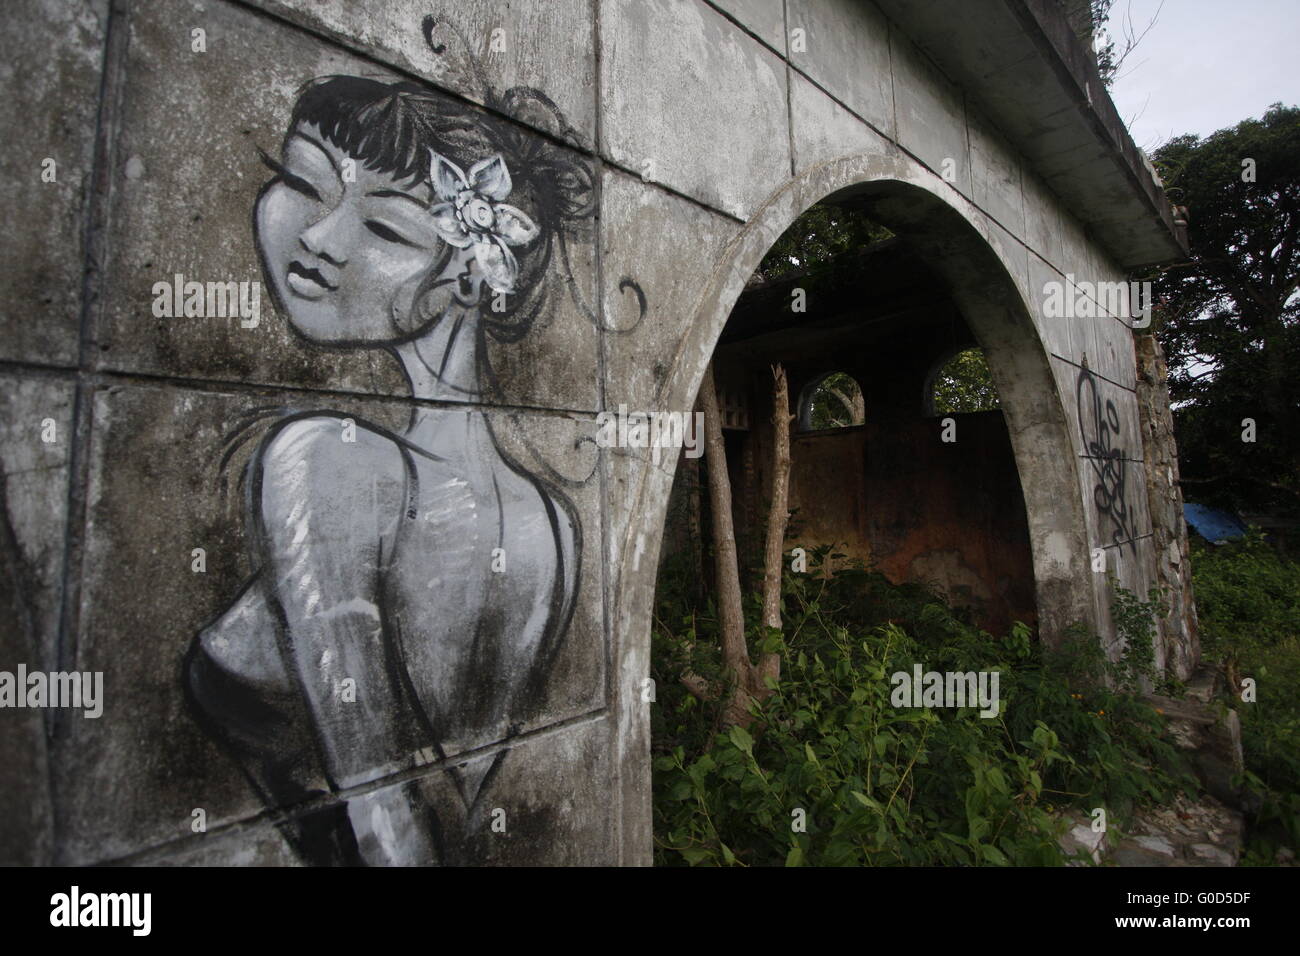 Ruined home in Kep, Cambodia, with graffiti. Stock Photo